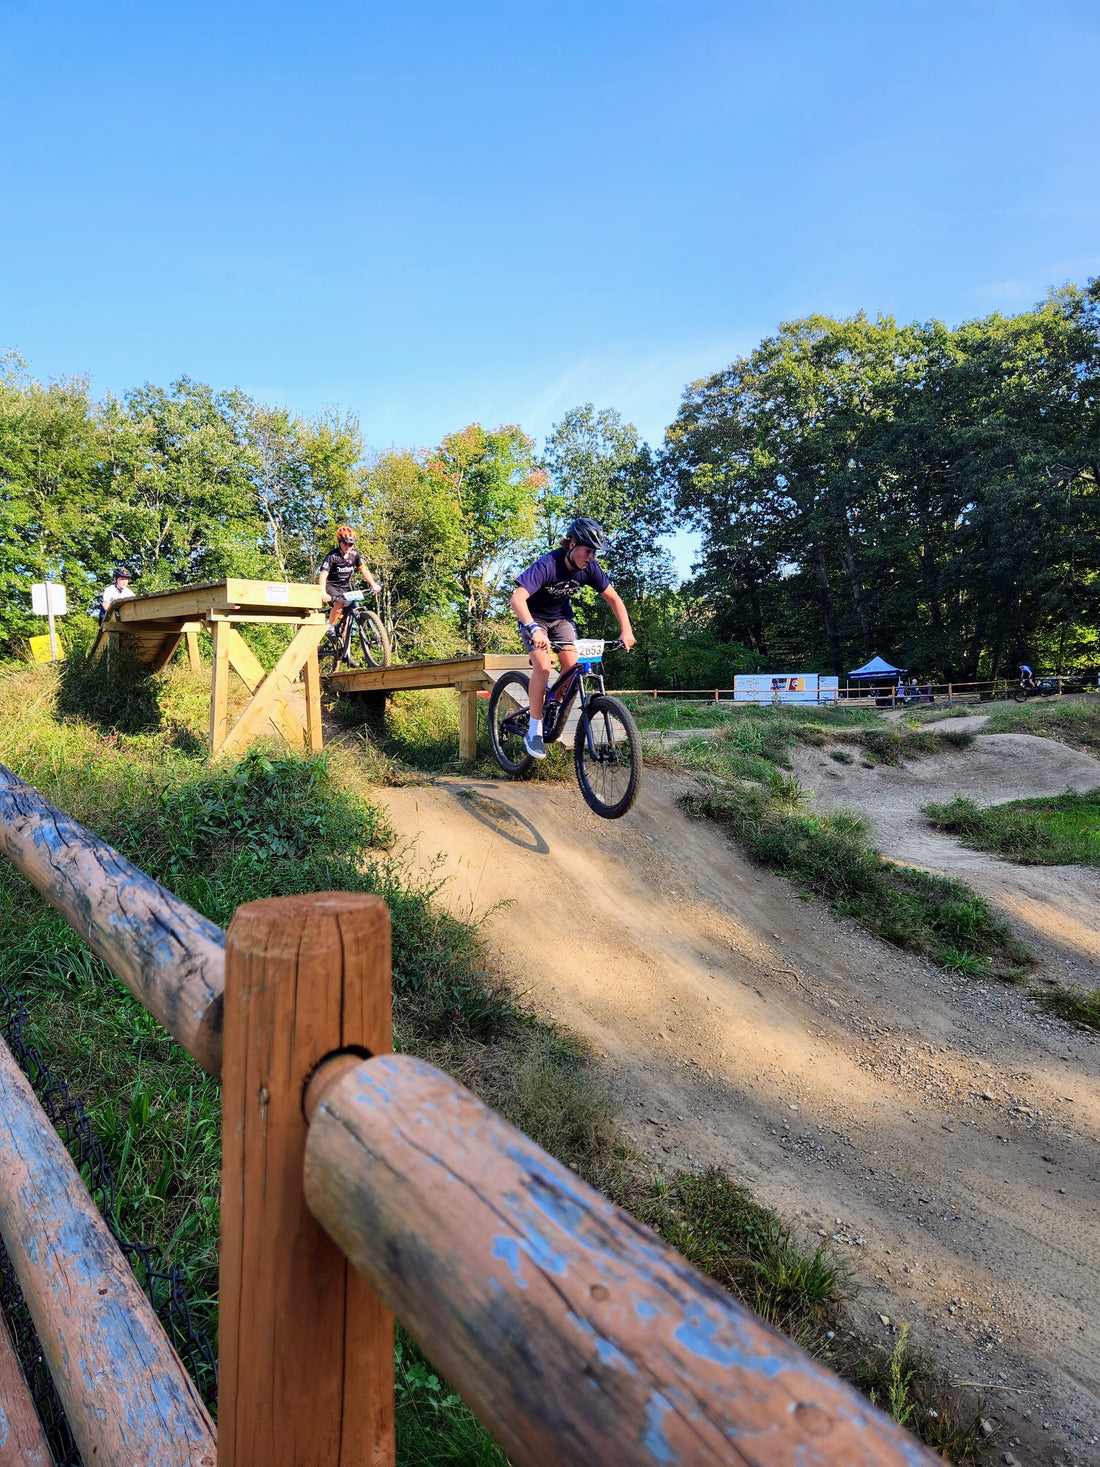 A Day of Adrenaline: PHS Mountain Bike Race at Stratham Hill Park